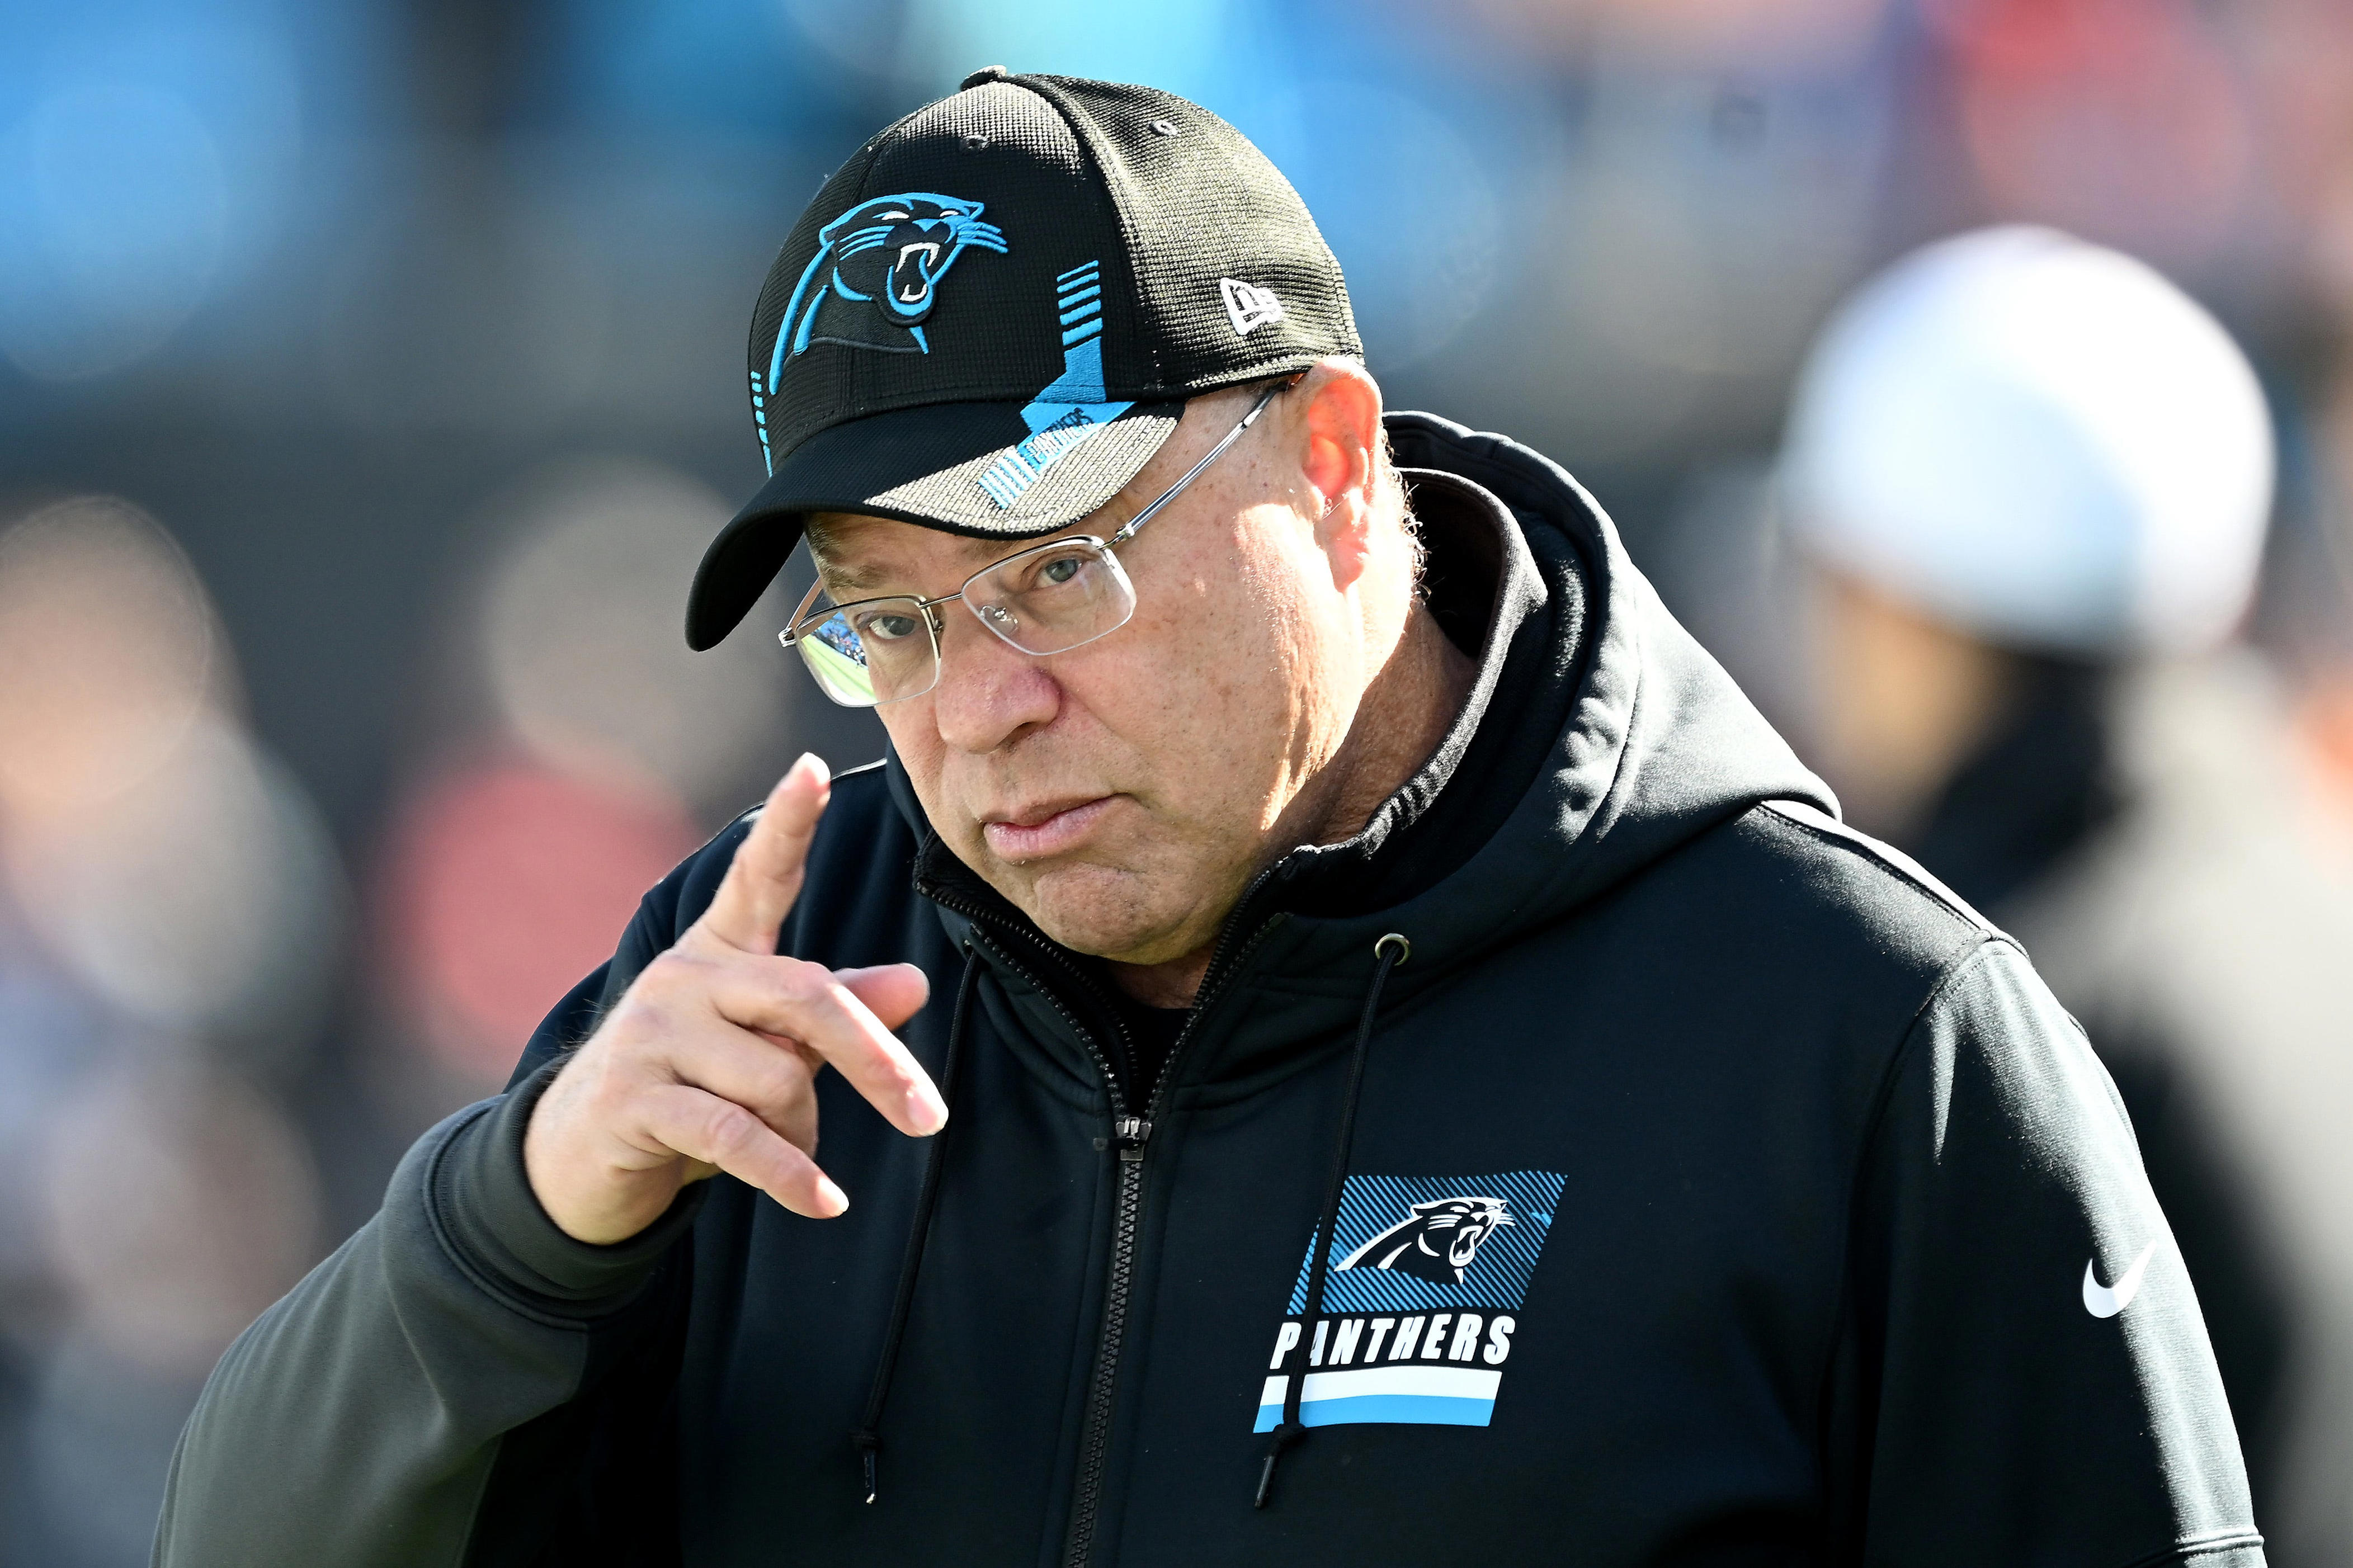 <p>Tepper, the founder of global hedge fund Appaloosa Management, has a net worth of $19.8 billion. He bought the Carolina Panthers in 2018 for $2.275 billion in a record for the NFL at the time.</p><p>He previously had an estimated 5% ownership stake in the Pittsburgh Steelers.</p><p>Tepper also owns Major League Soccer franchise Charlotte FC, for which he reportedly paid an estimated $325 million expansion fee.</p>